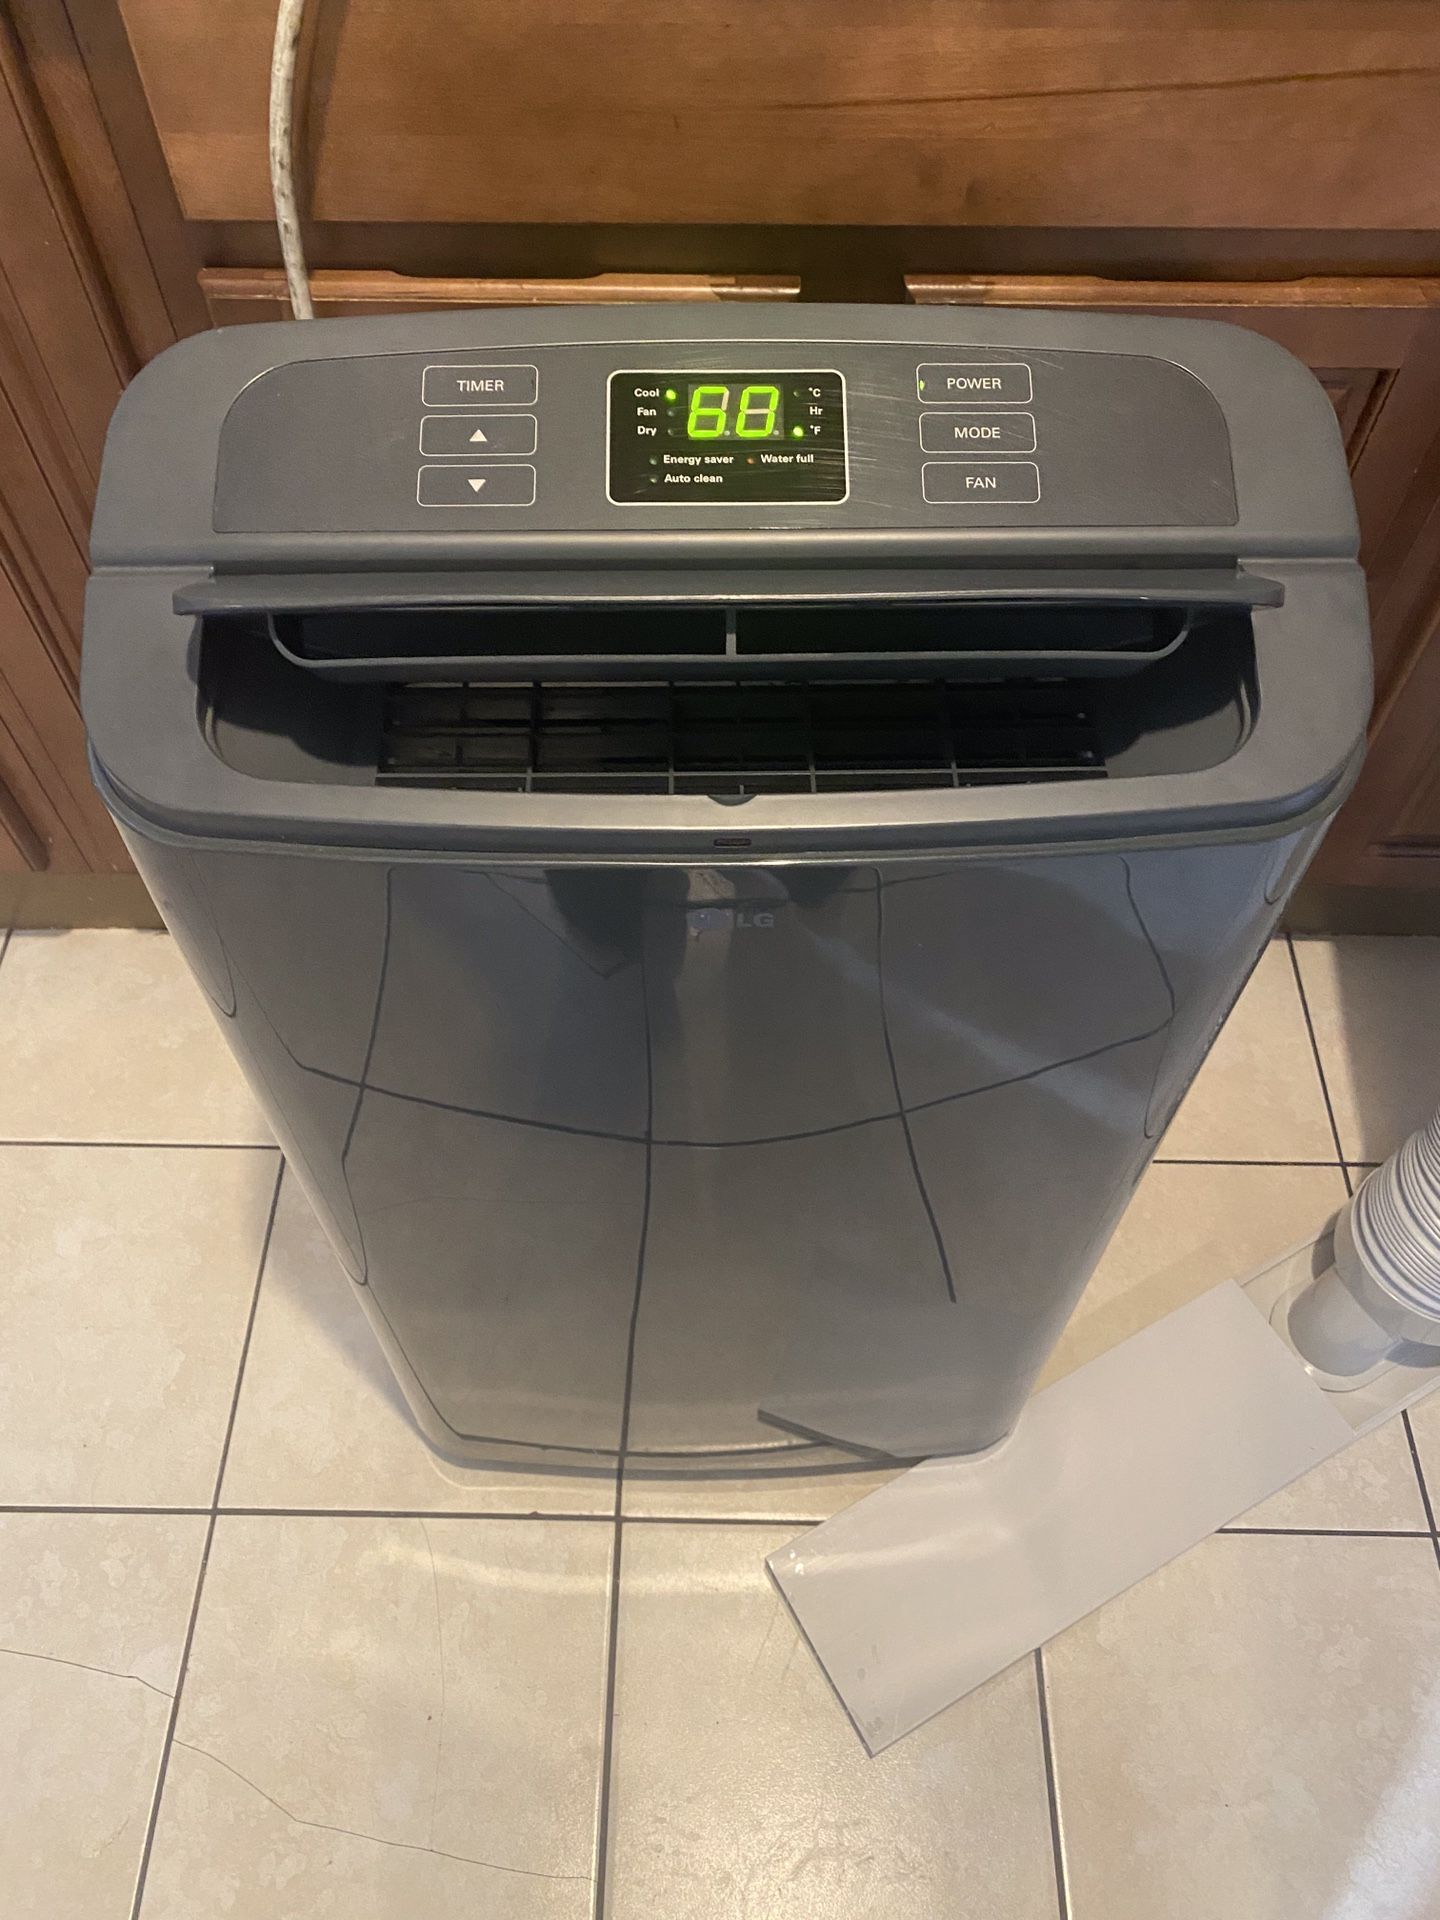 3 in 1 portable lg air conditioner 12,000 btu like new